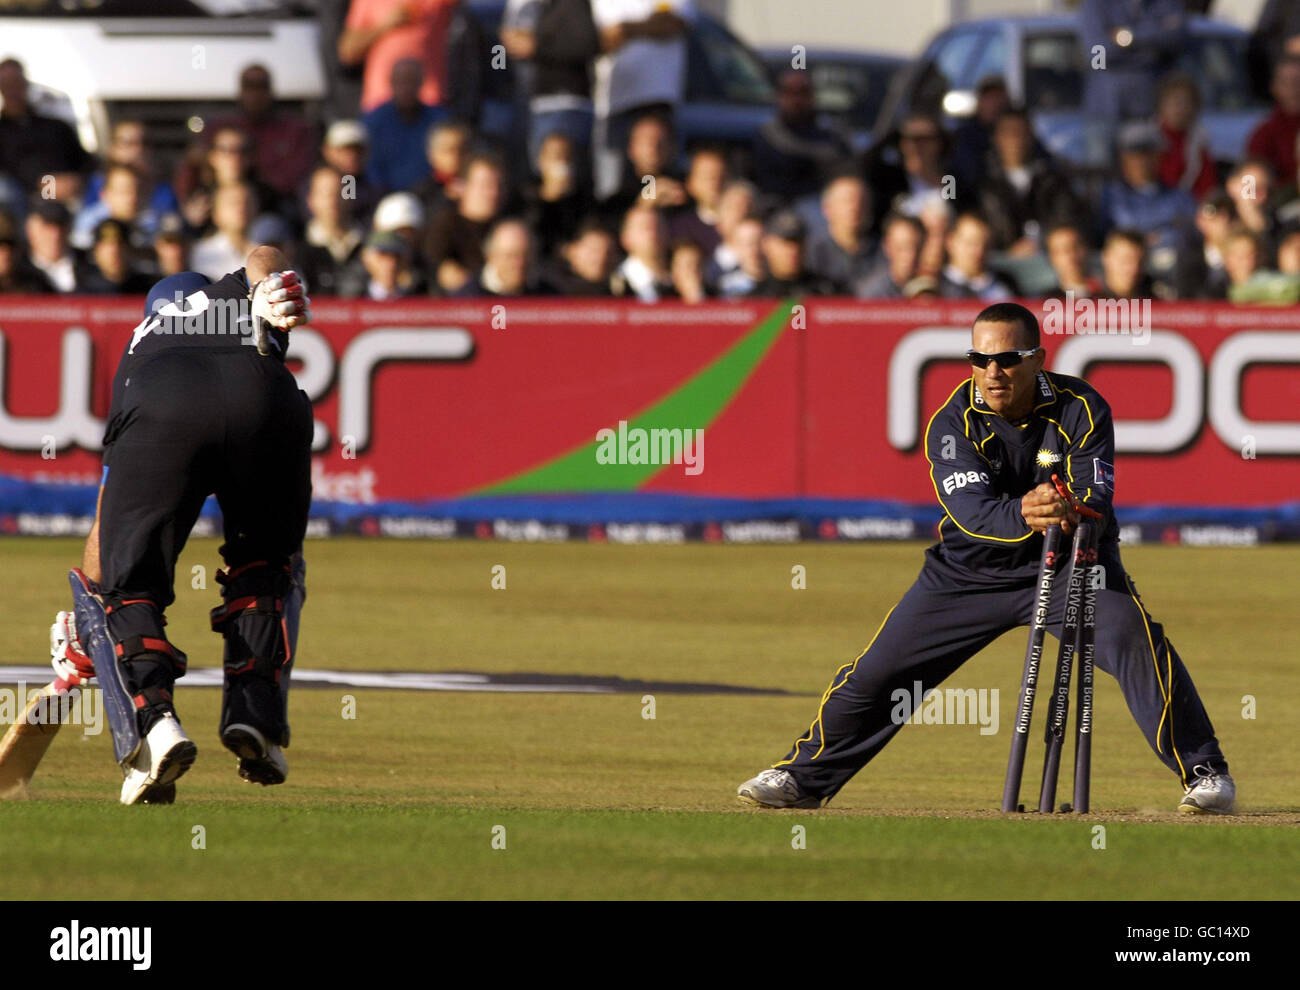 Sussex's Michael Yardy (left) is run out by Durham's Gareth Breese during the match at the County Ground, Hove. Stock Photo